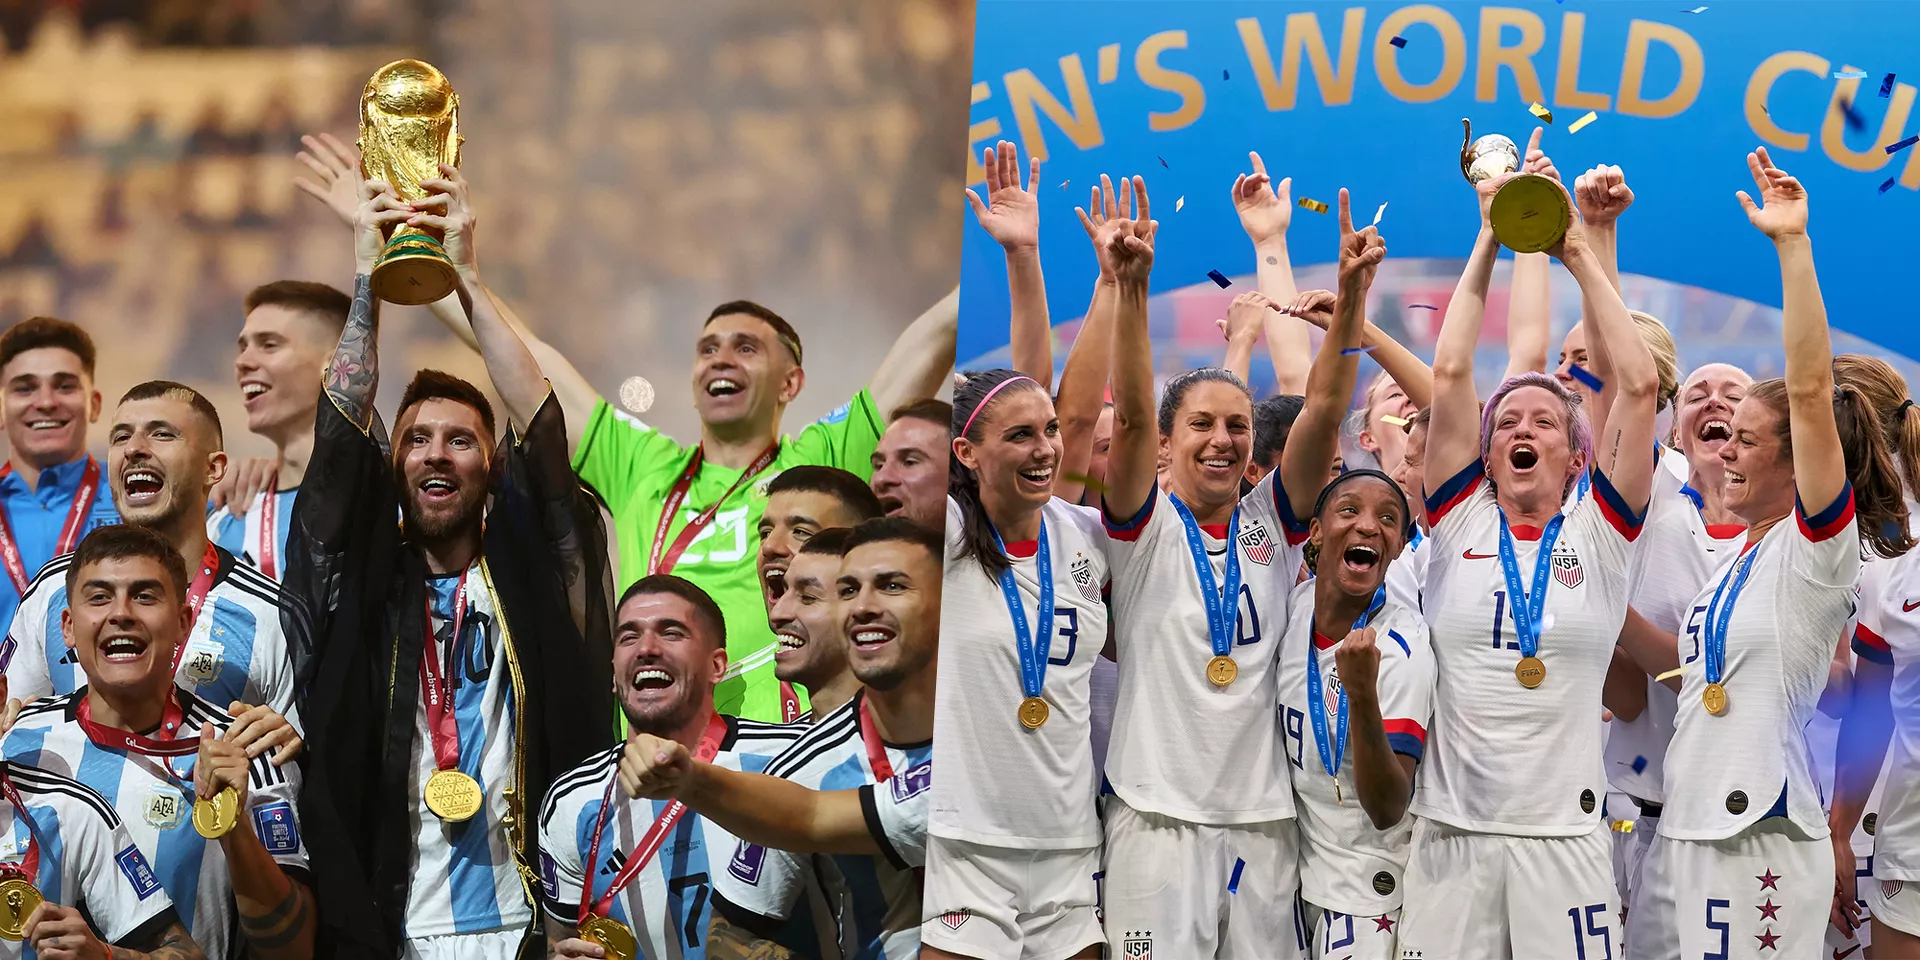 key differences between Women's and Men's World Cups